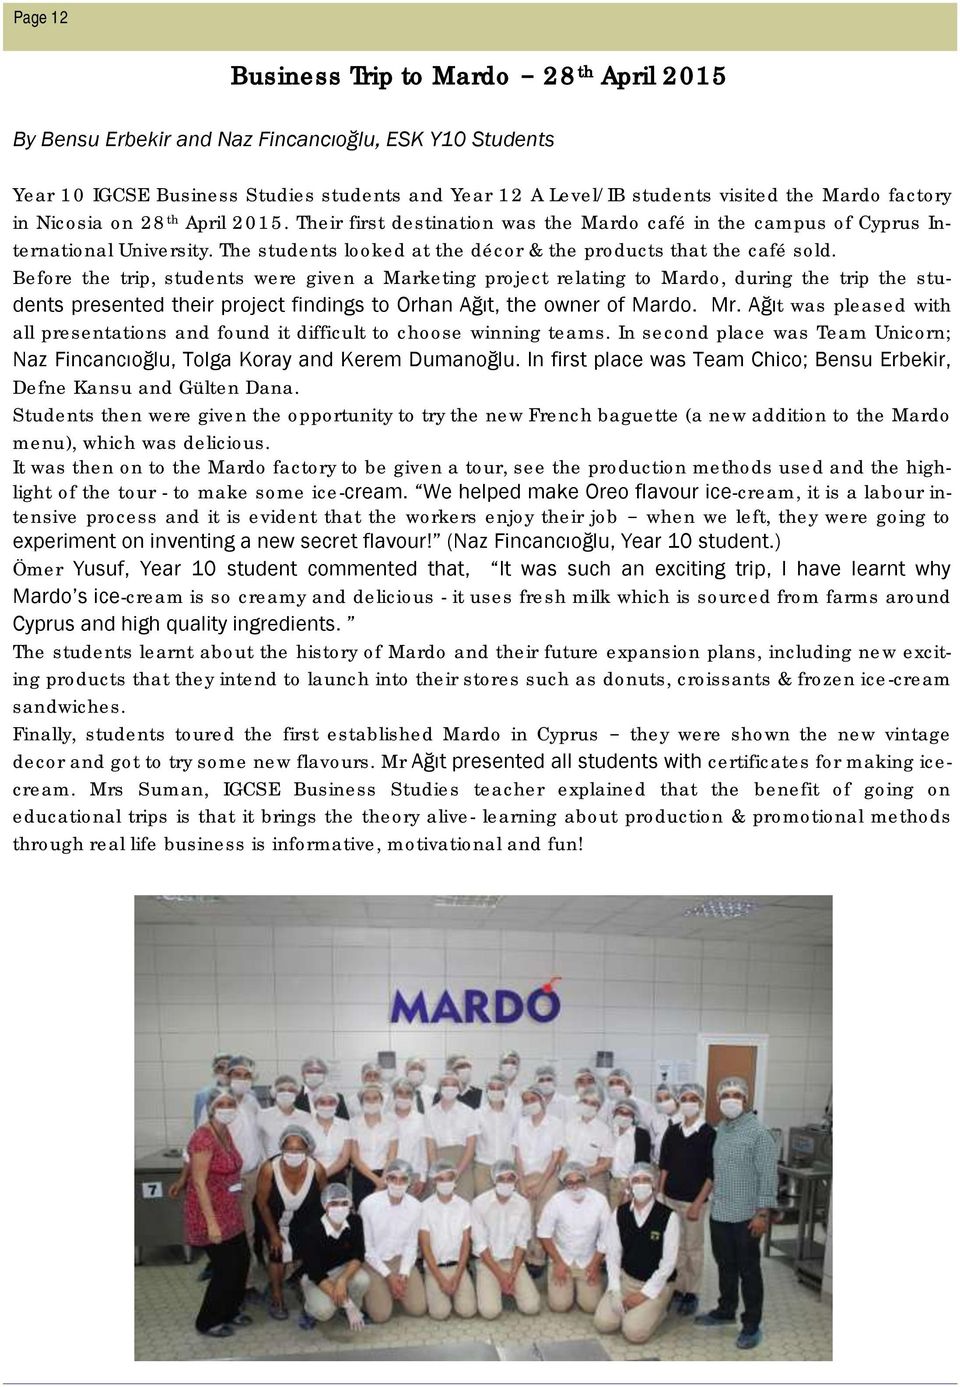 Before the trip, students were given a Marketing project relating to Mardo, during the trip the students presented their project findings to Orhan Ağıt, the owner of Mardo. Mr.